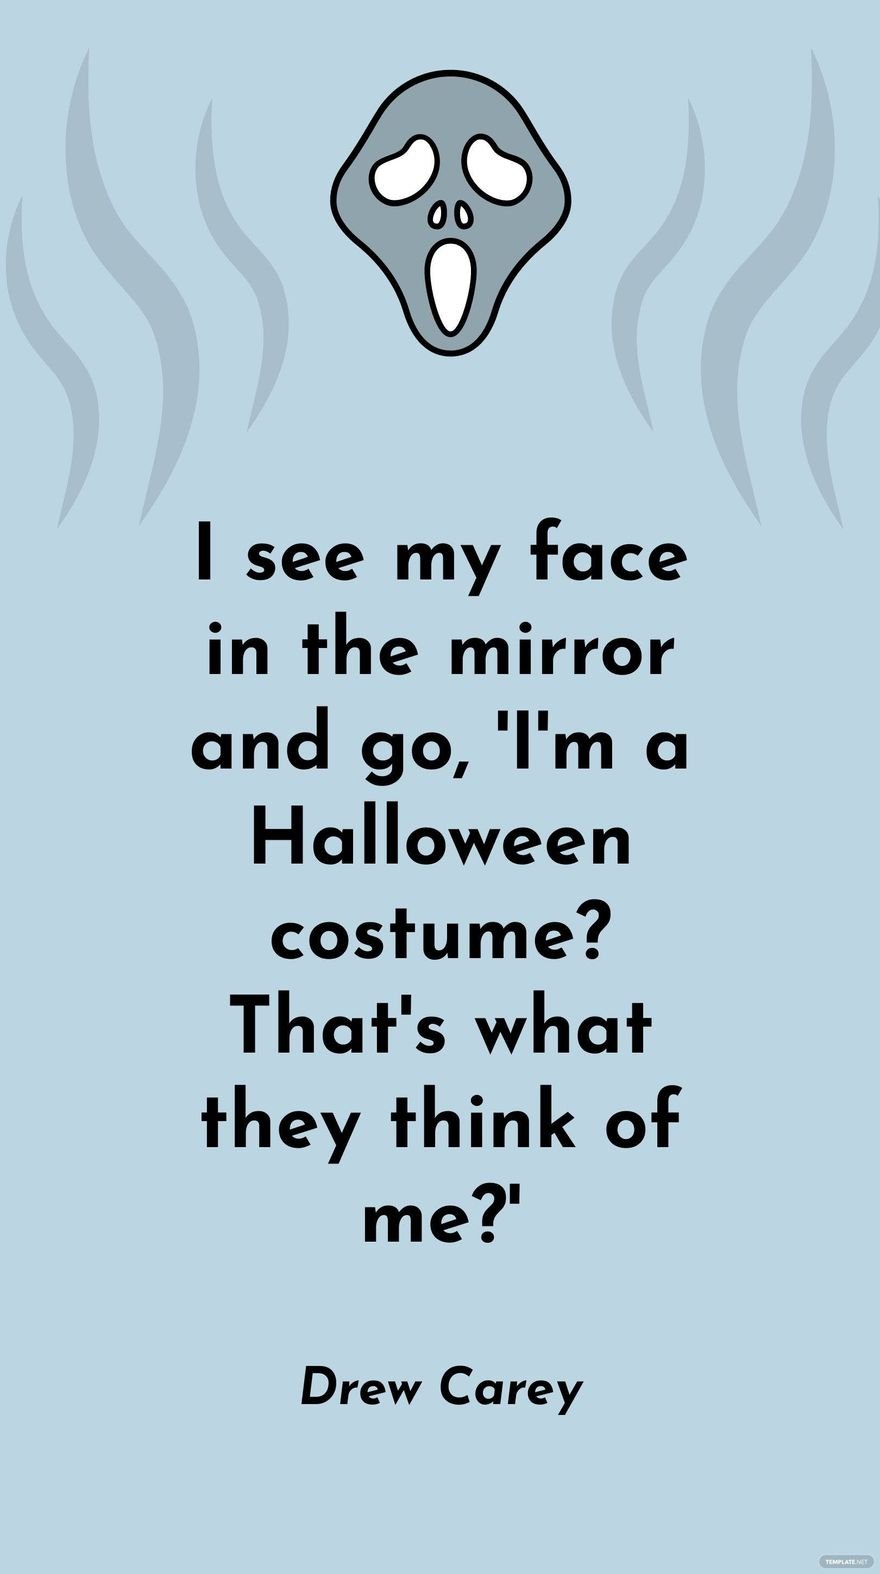 Free Drew Carey - I see my face in the mirror and go, 'I'm a Halloween costume? That's what they think of me?'